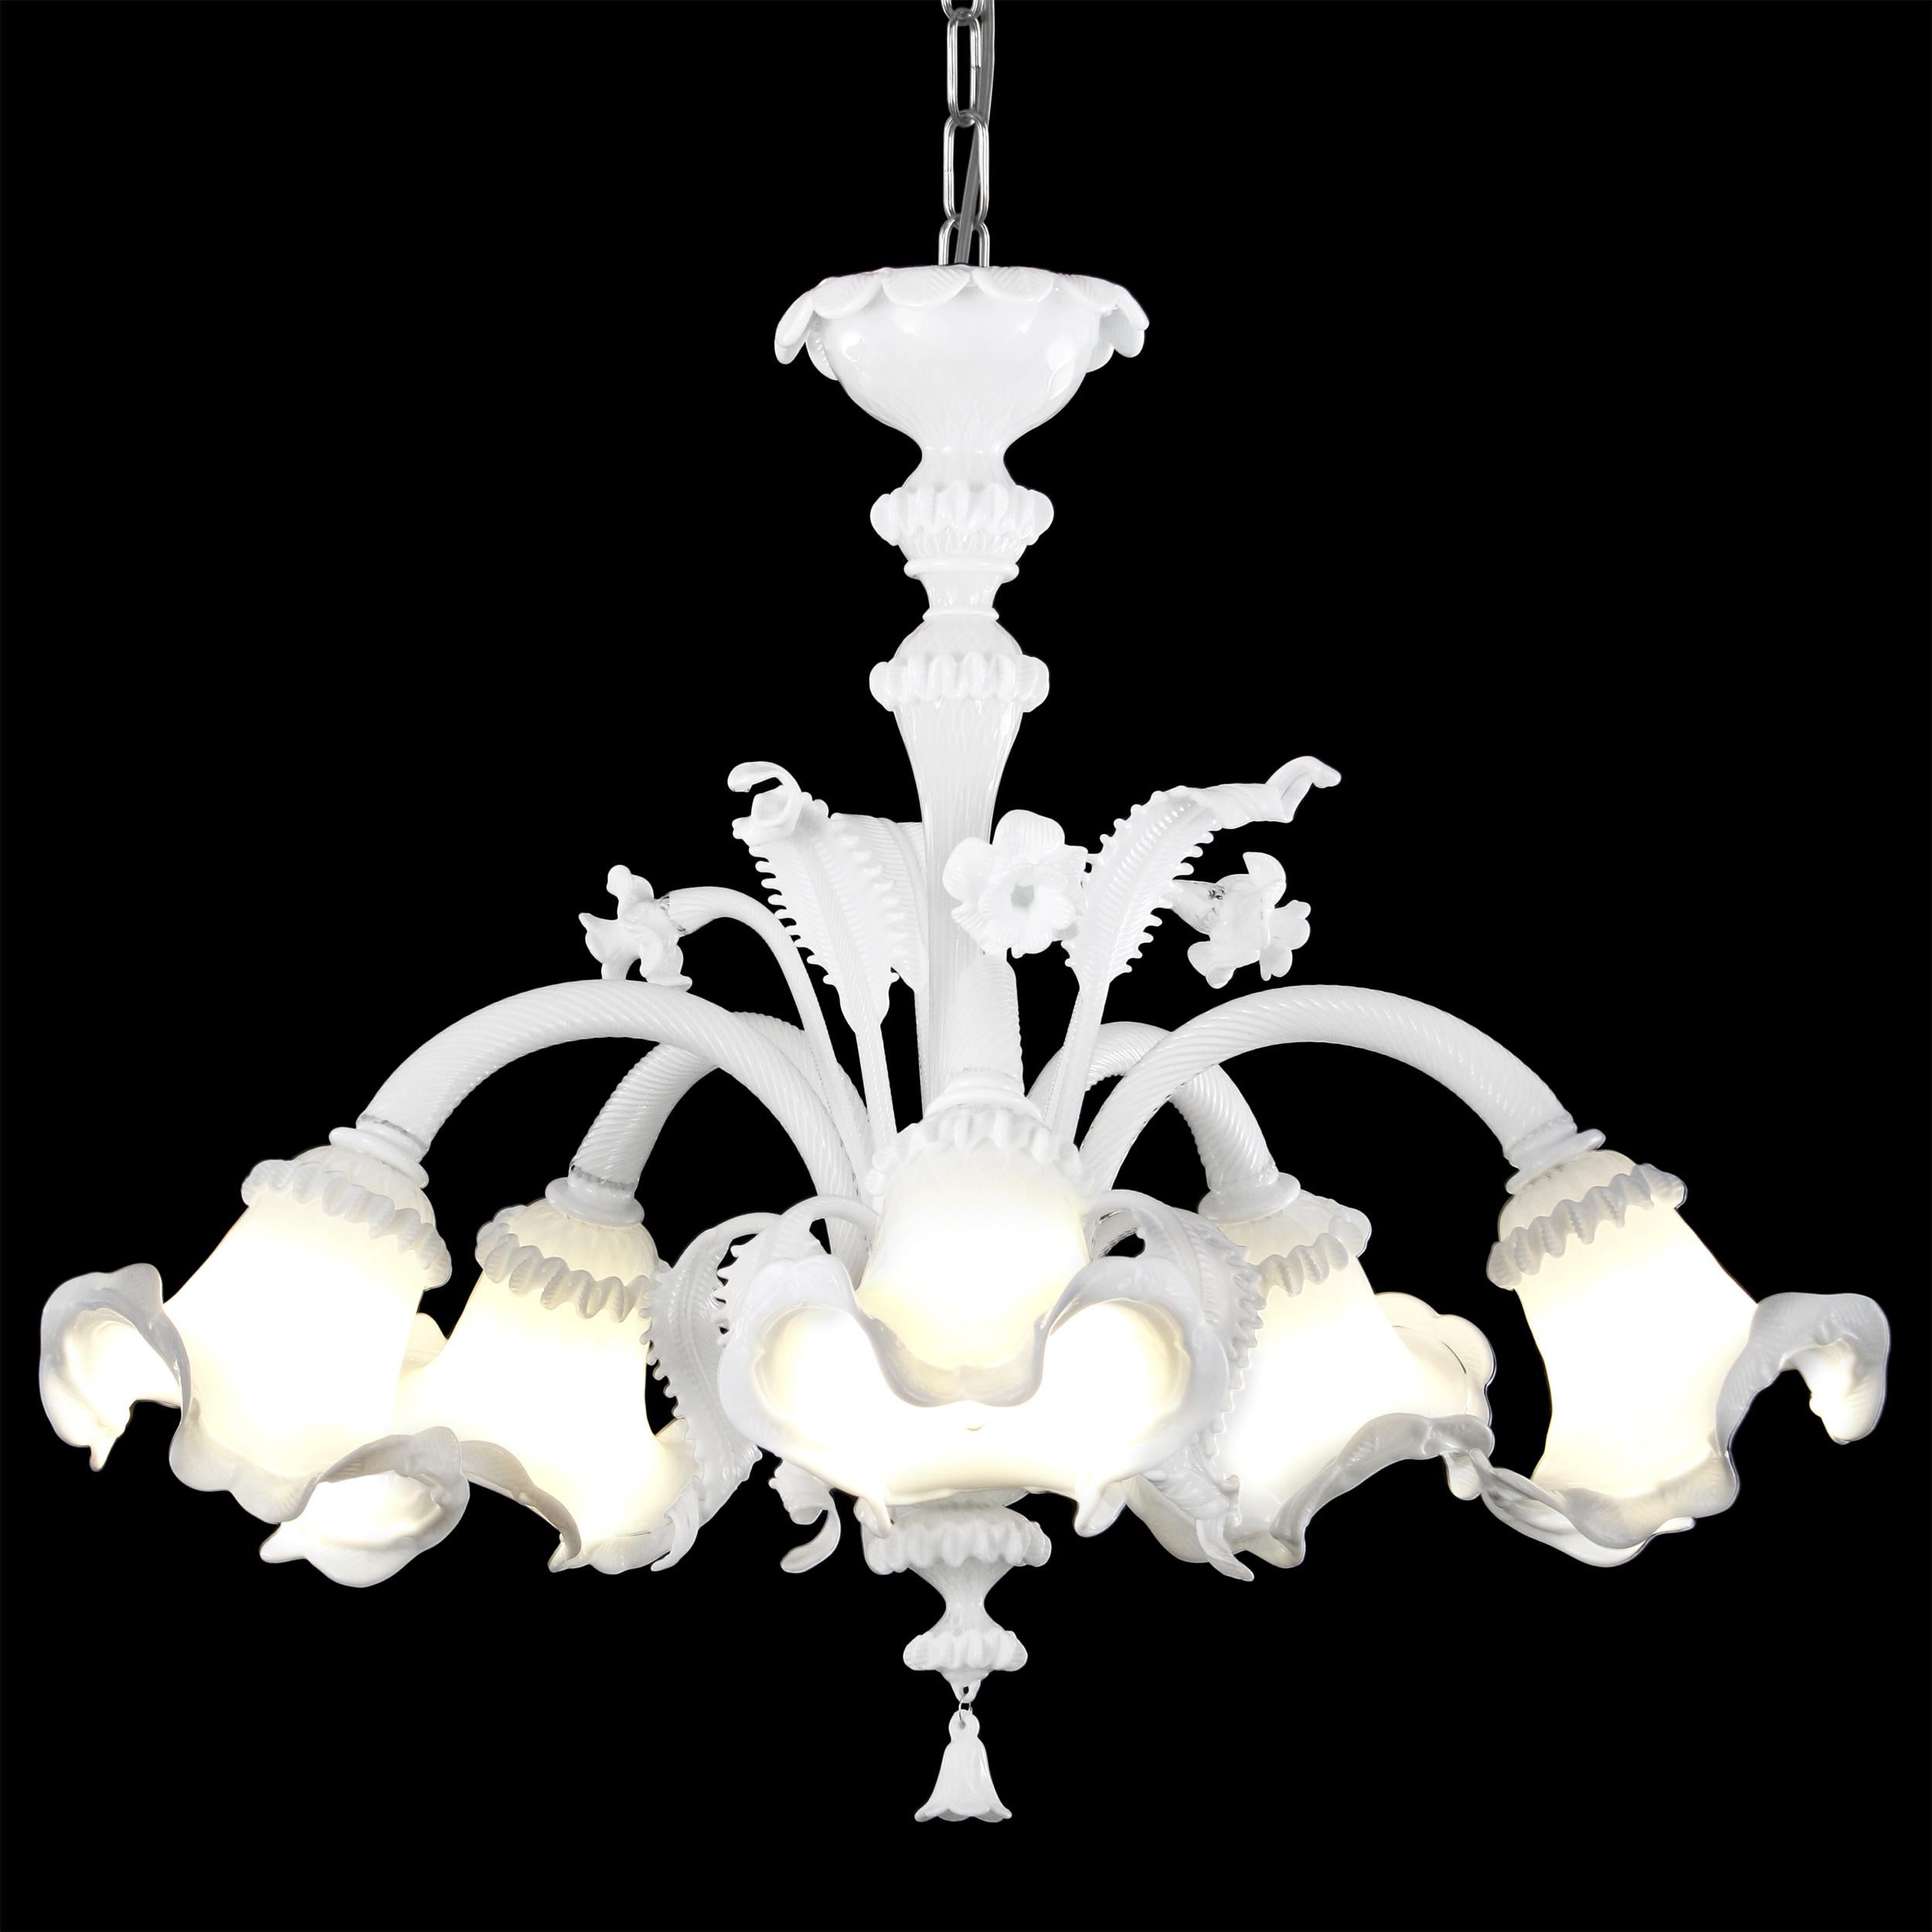 Luxury chandelier 5 arms white encased Murano glass with upper flowers and leaves Golden-Century 86 by Multiforme
The collection of artistic glass chandeliers Golden Century 086 is a tribute to the golden and luxurious Venice of the XVIIIth. The